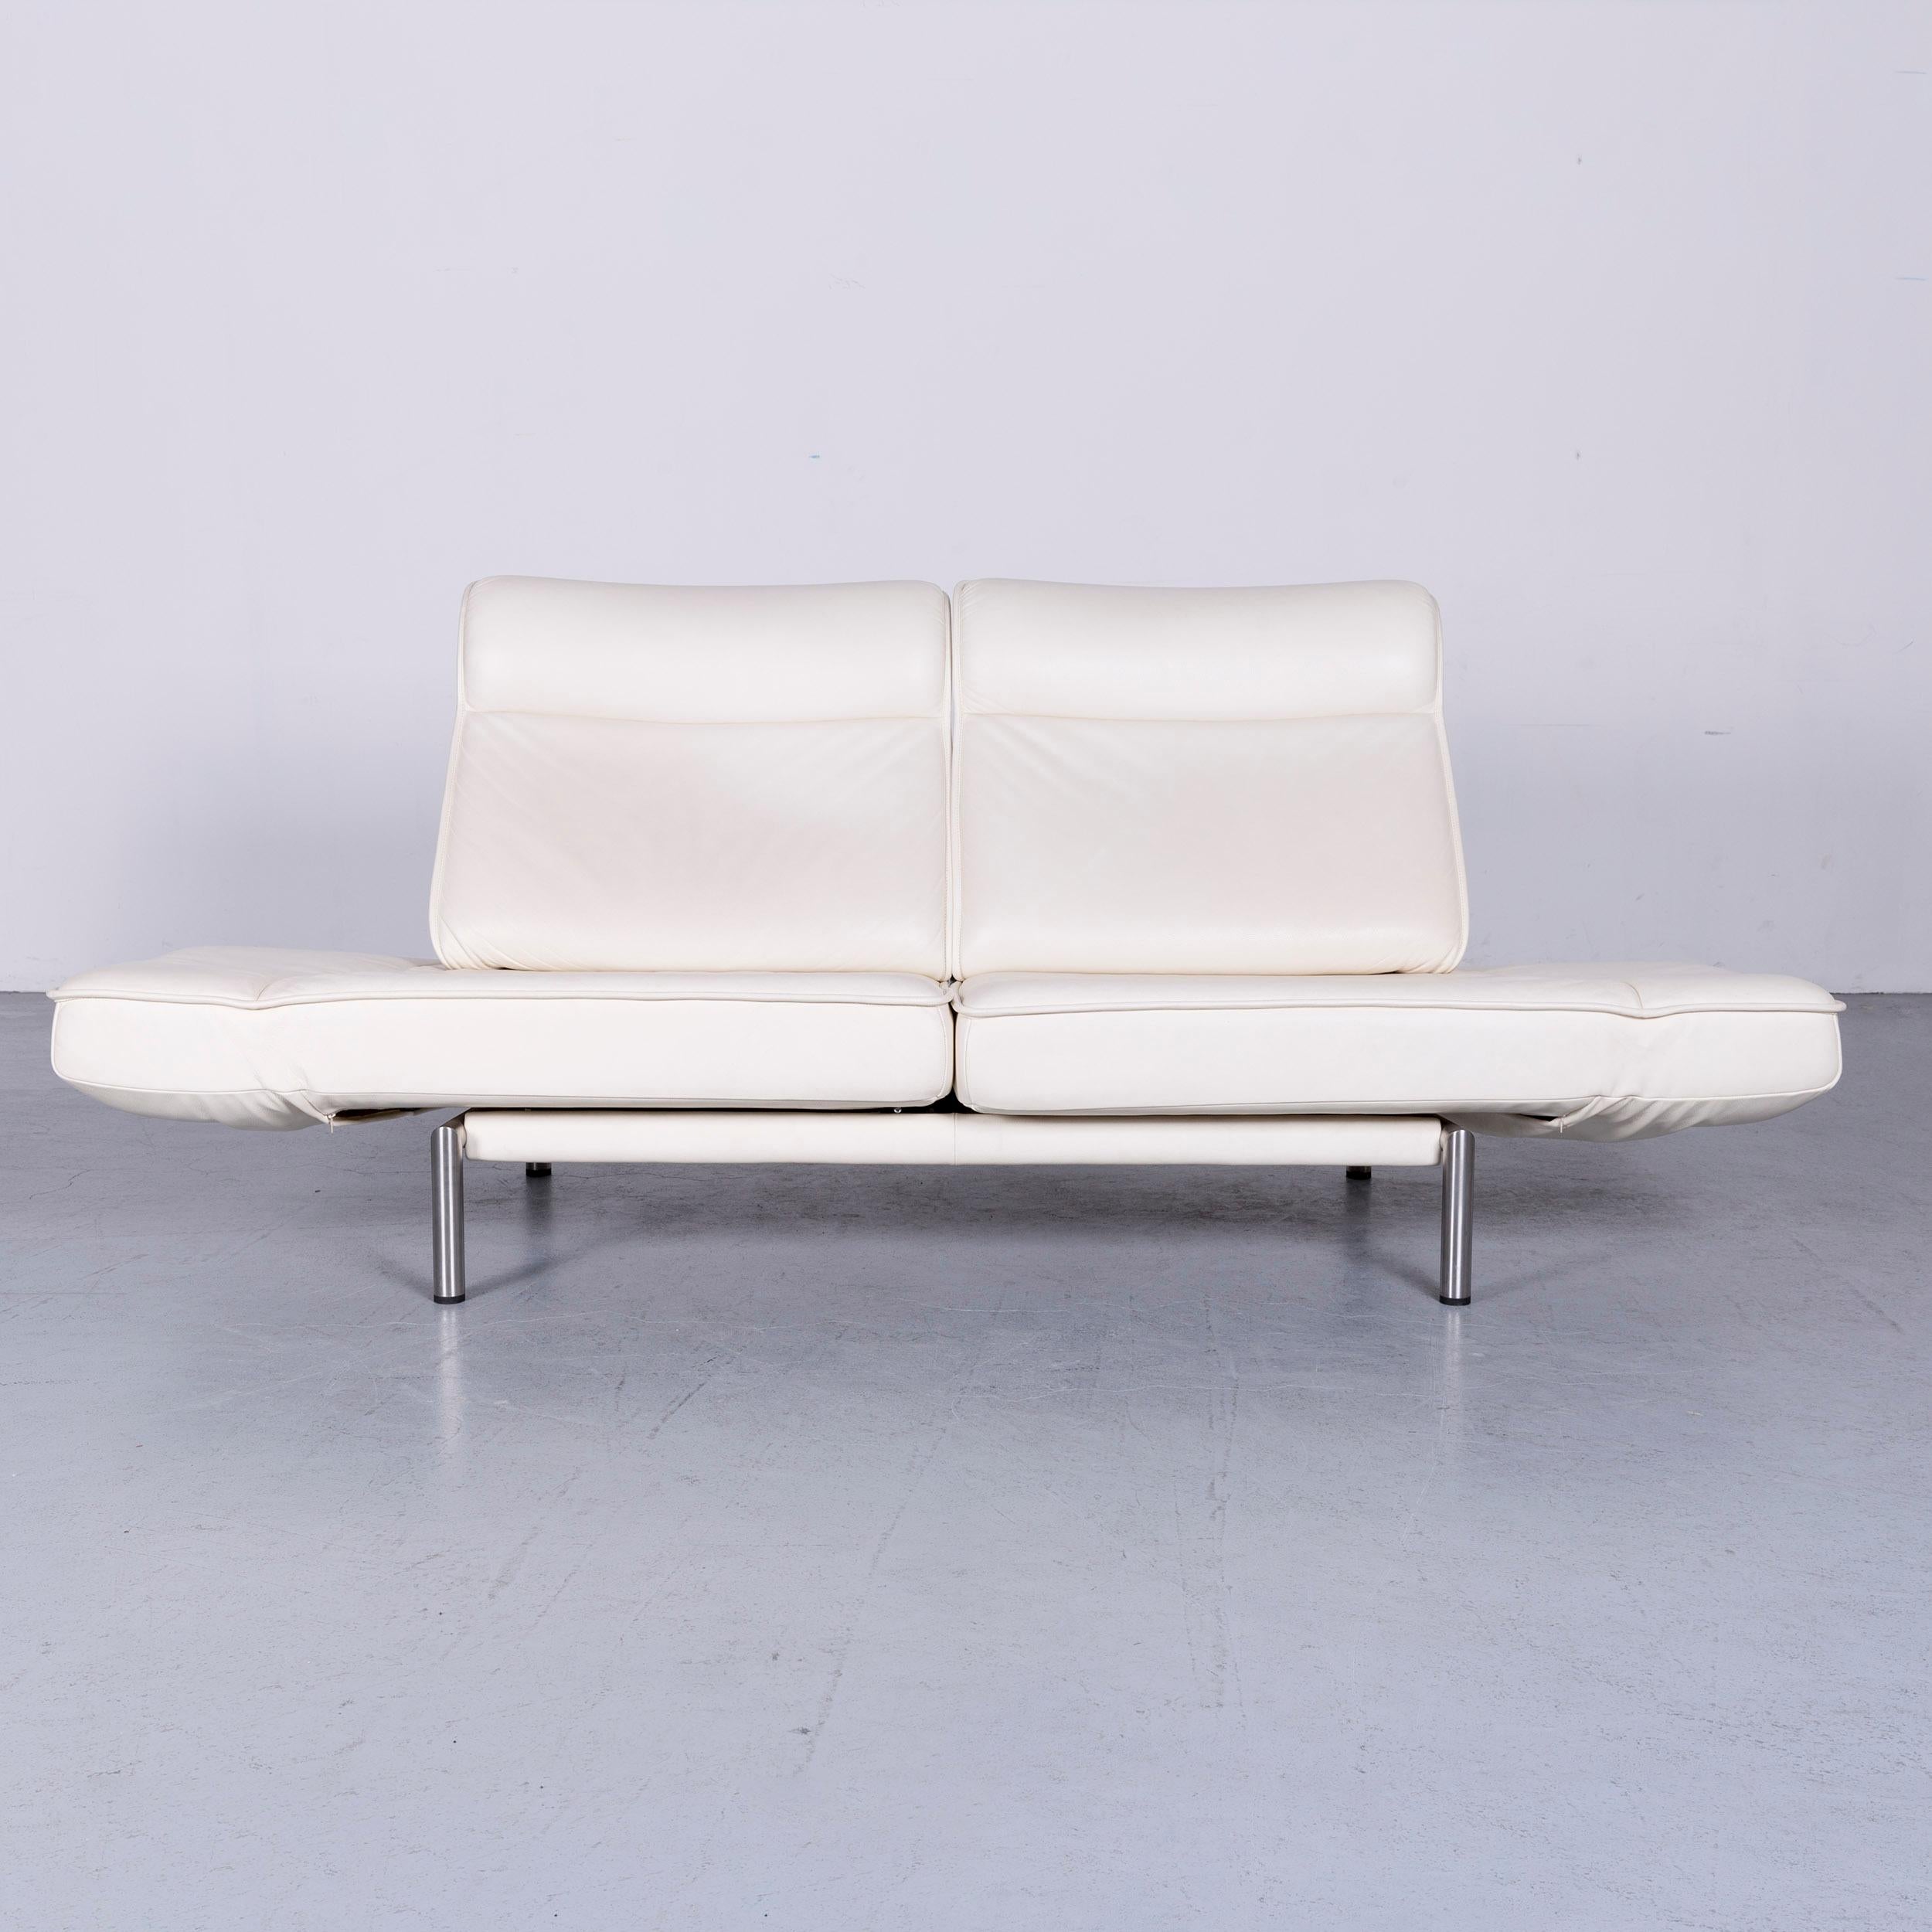 White colored original De Sede DS 450 designer leather sofa in a minimalistic and modern design, with convenient functions, made for pure comfort and flexibility.